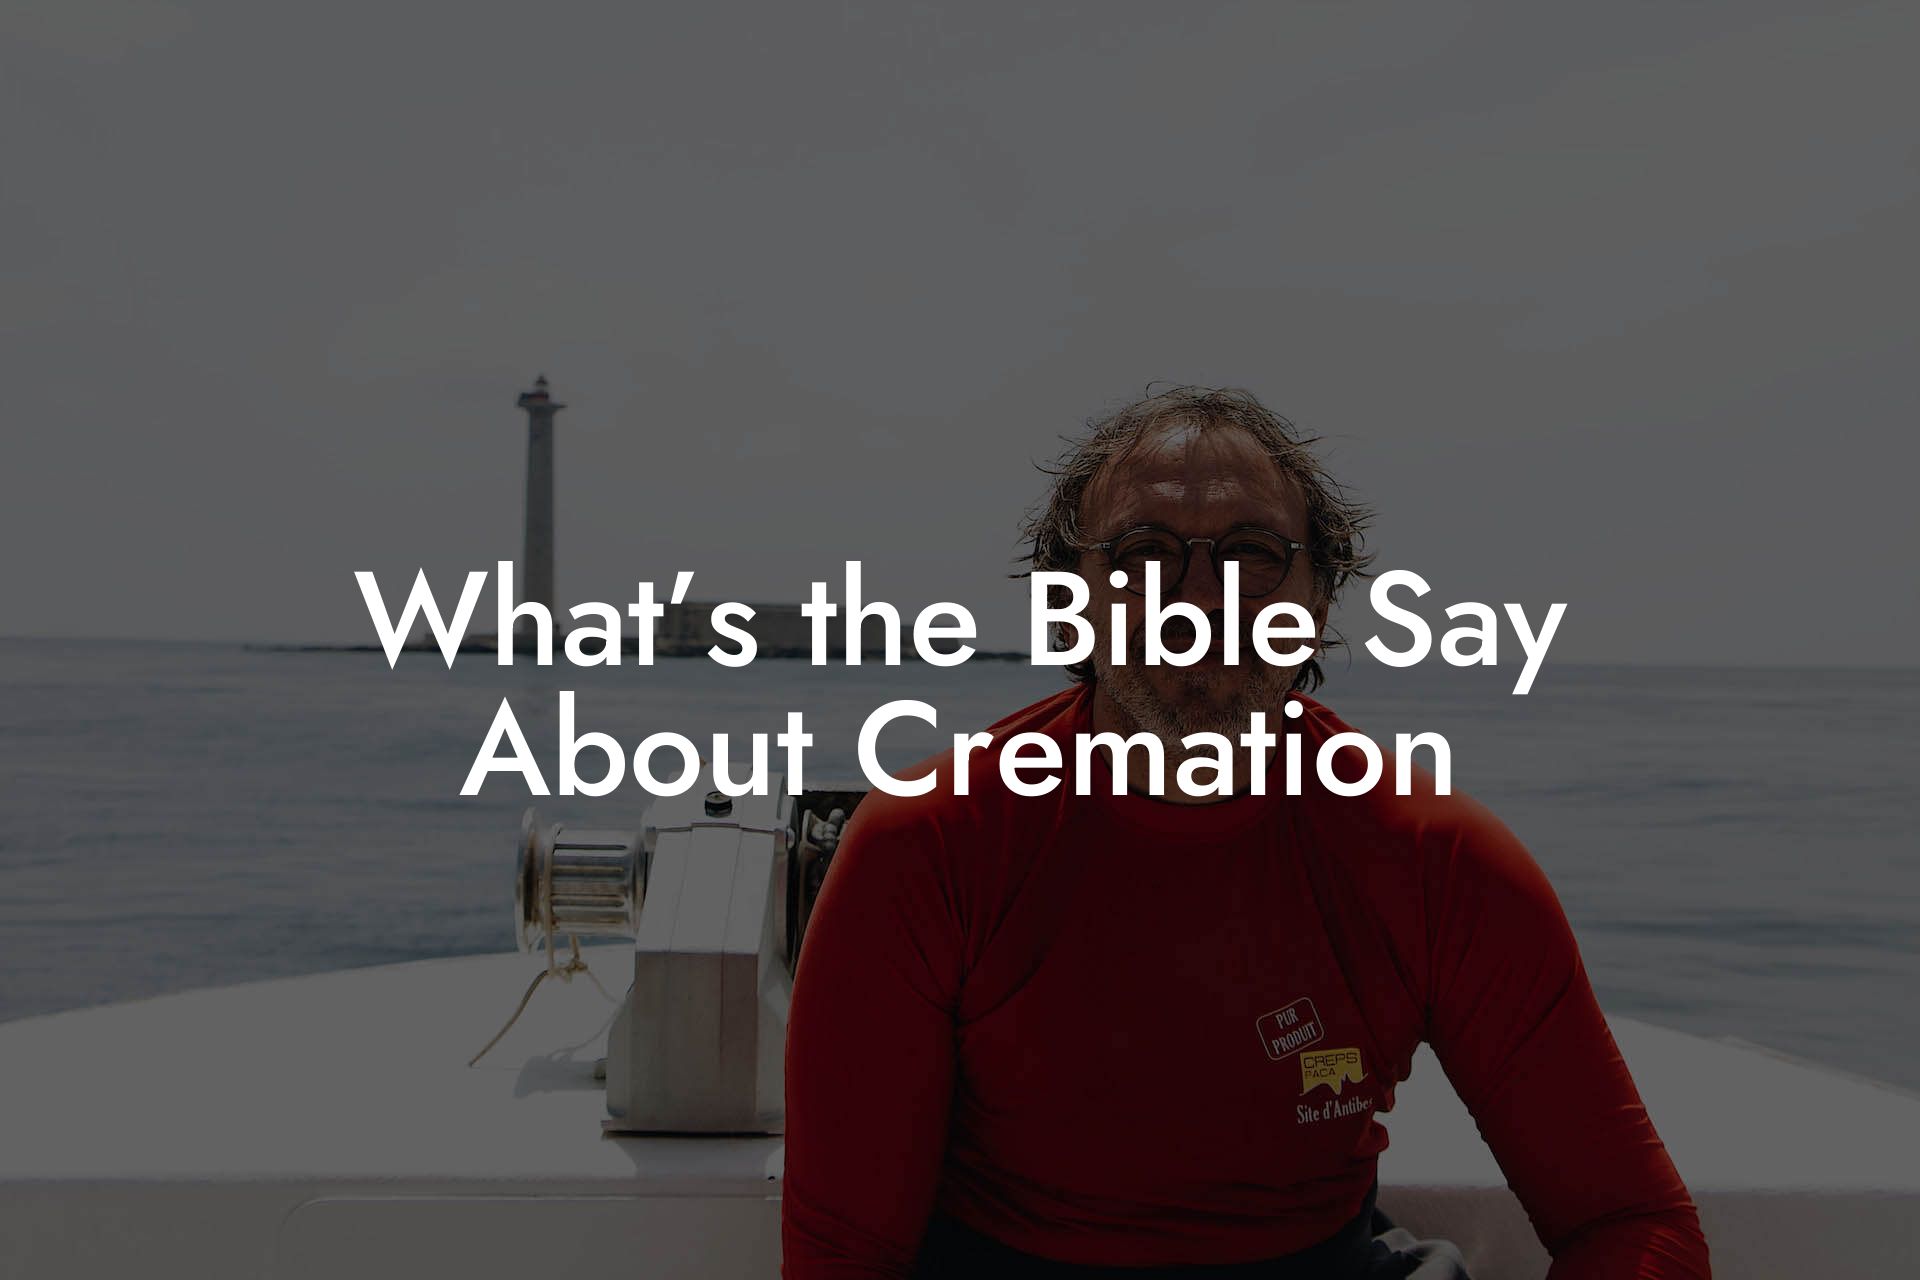 What’s the Bible Say About Cremation